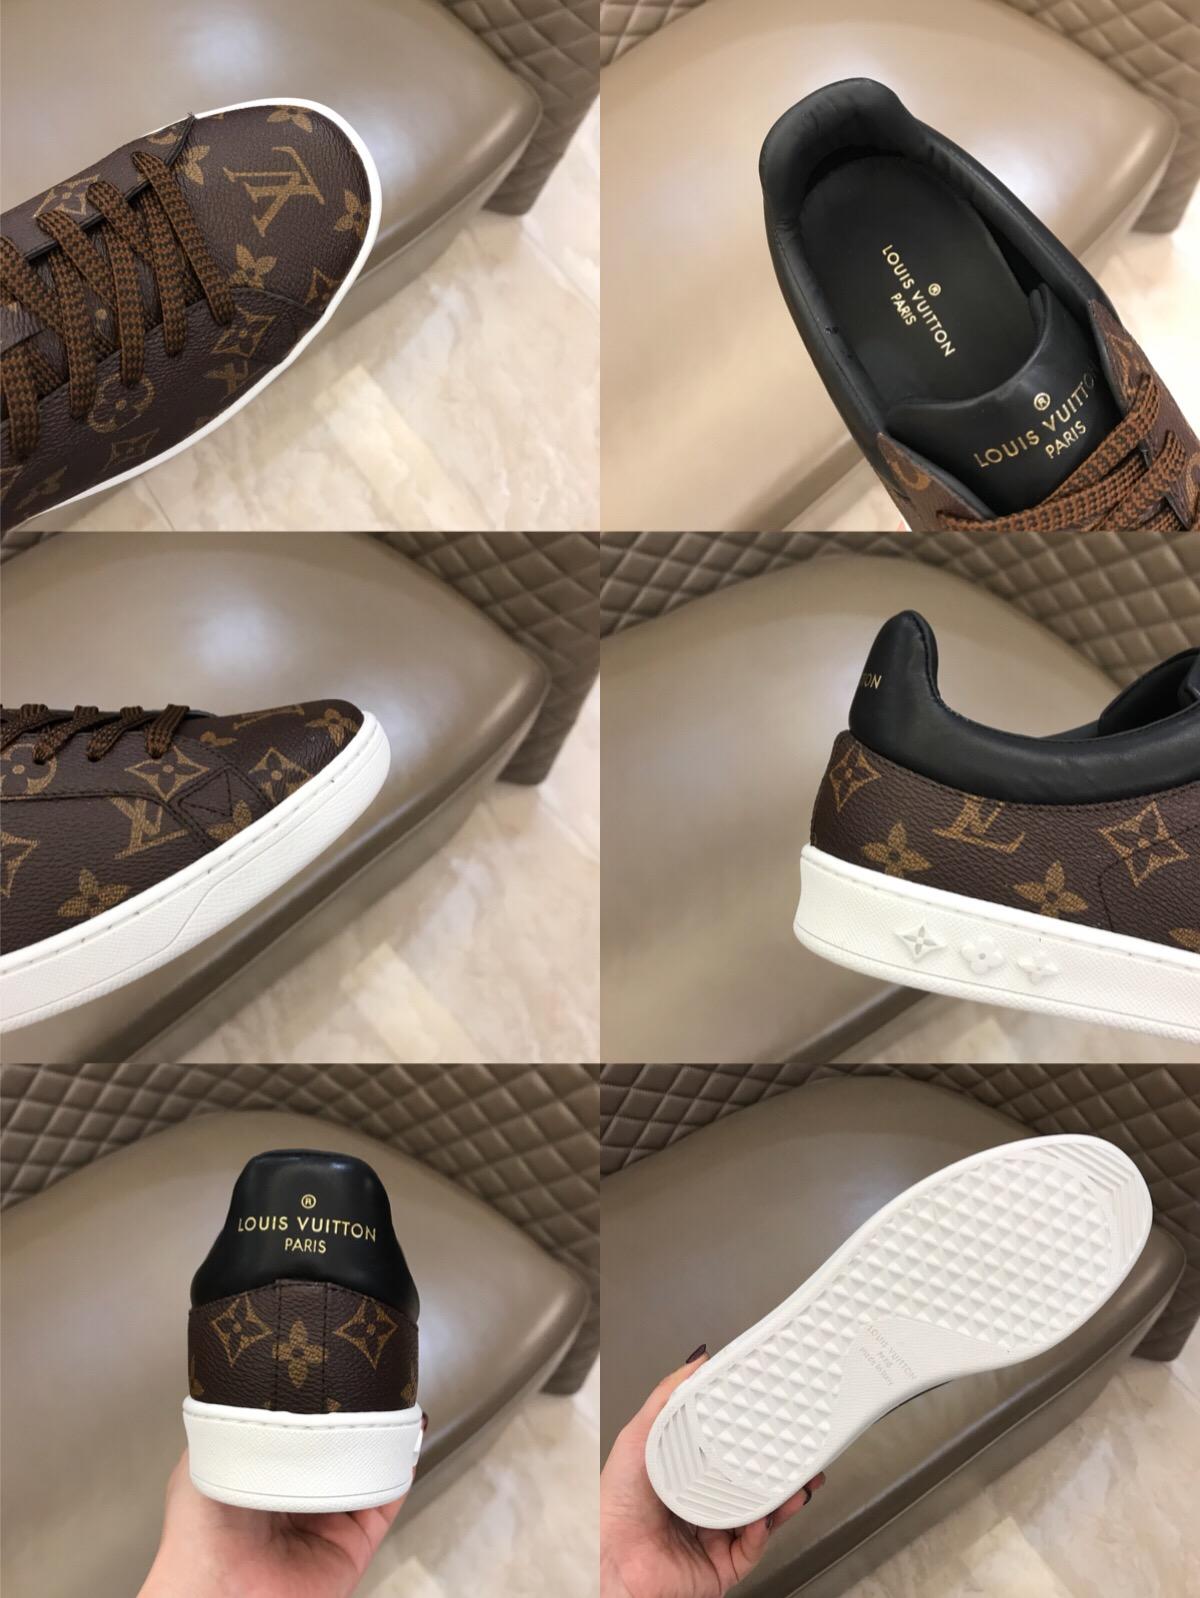 lv Perfect Quality Sneakers Brown and Monogram Flower embossed with white sole MS02825